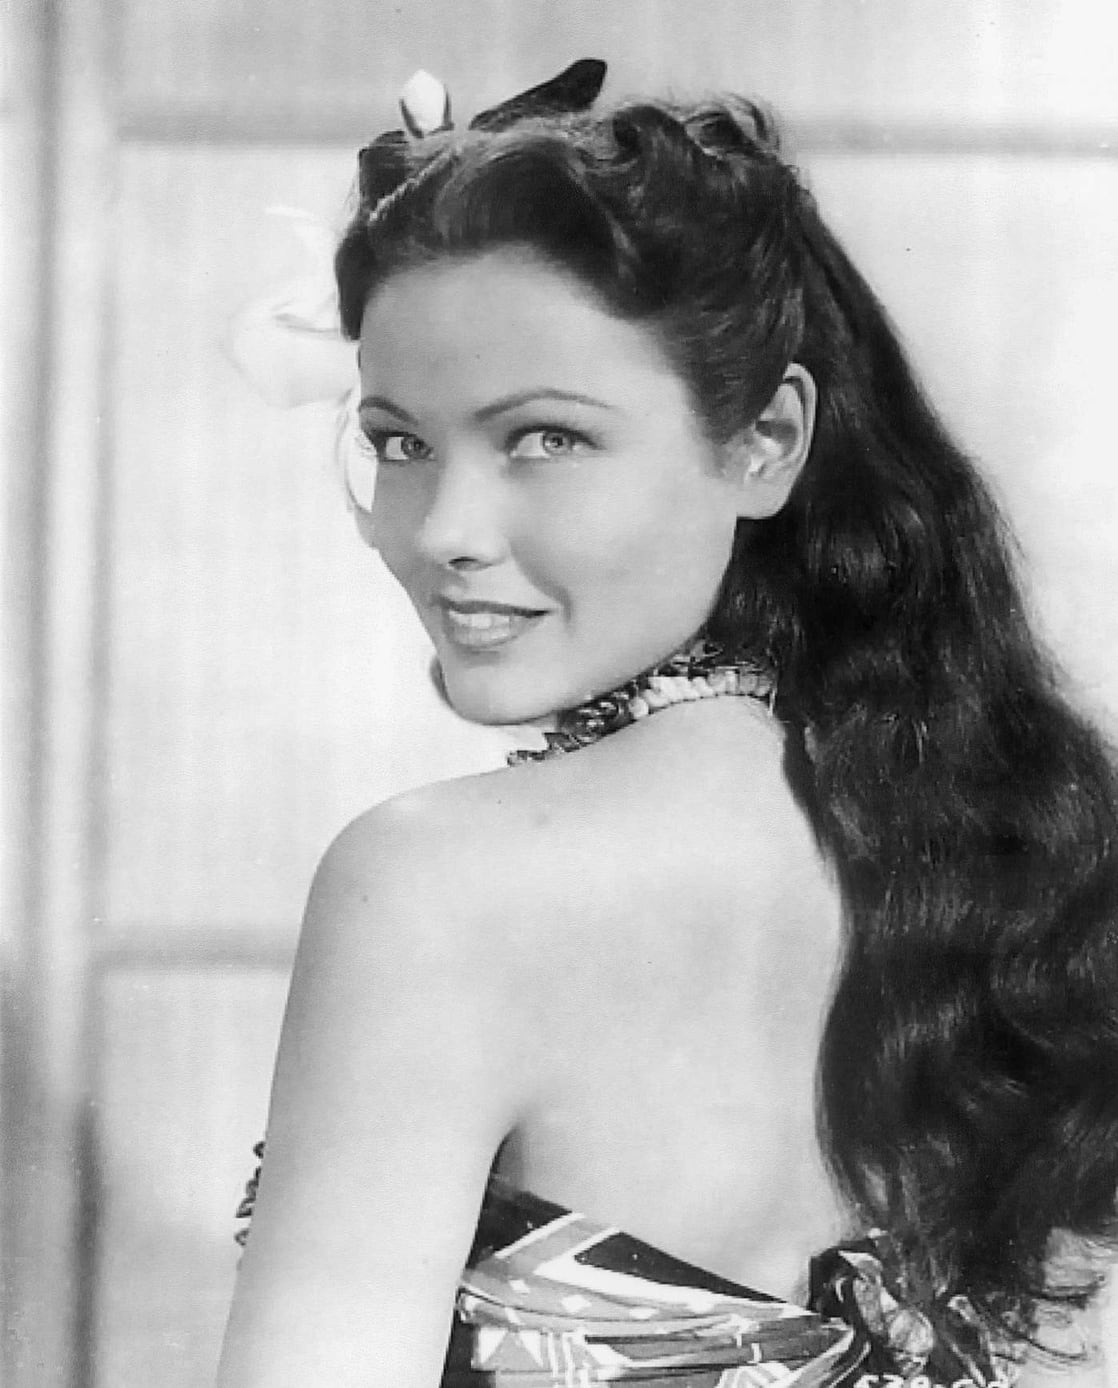 A brief biography about Hollywood star Gene Tierney